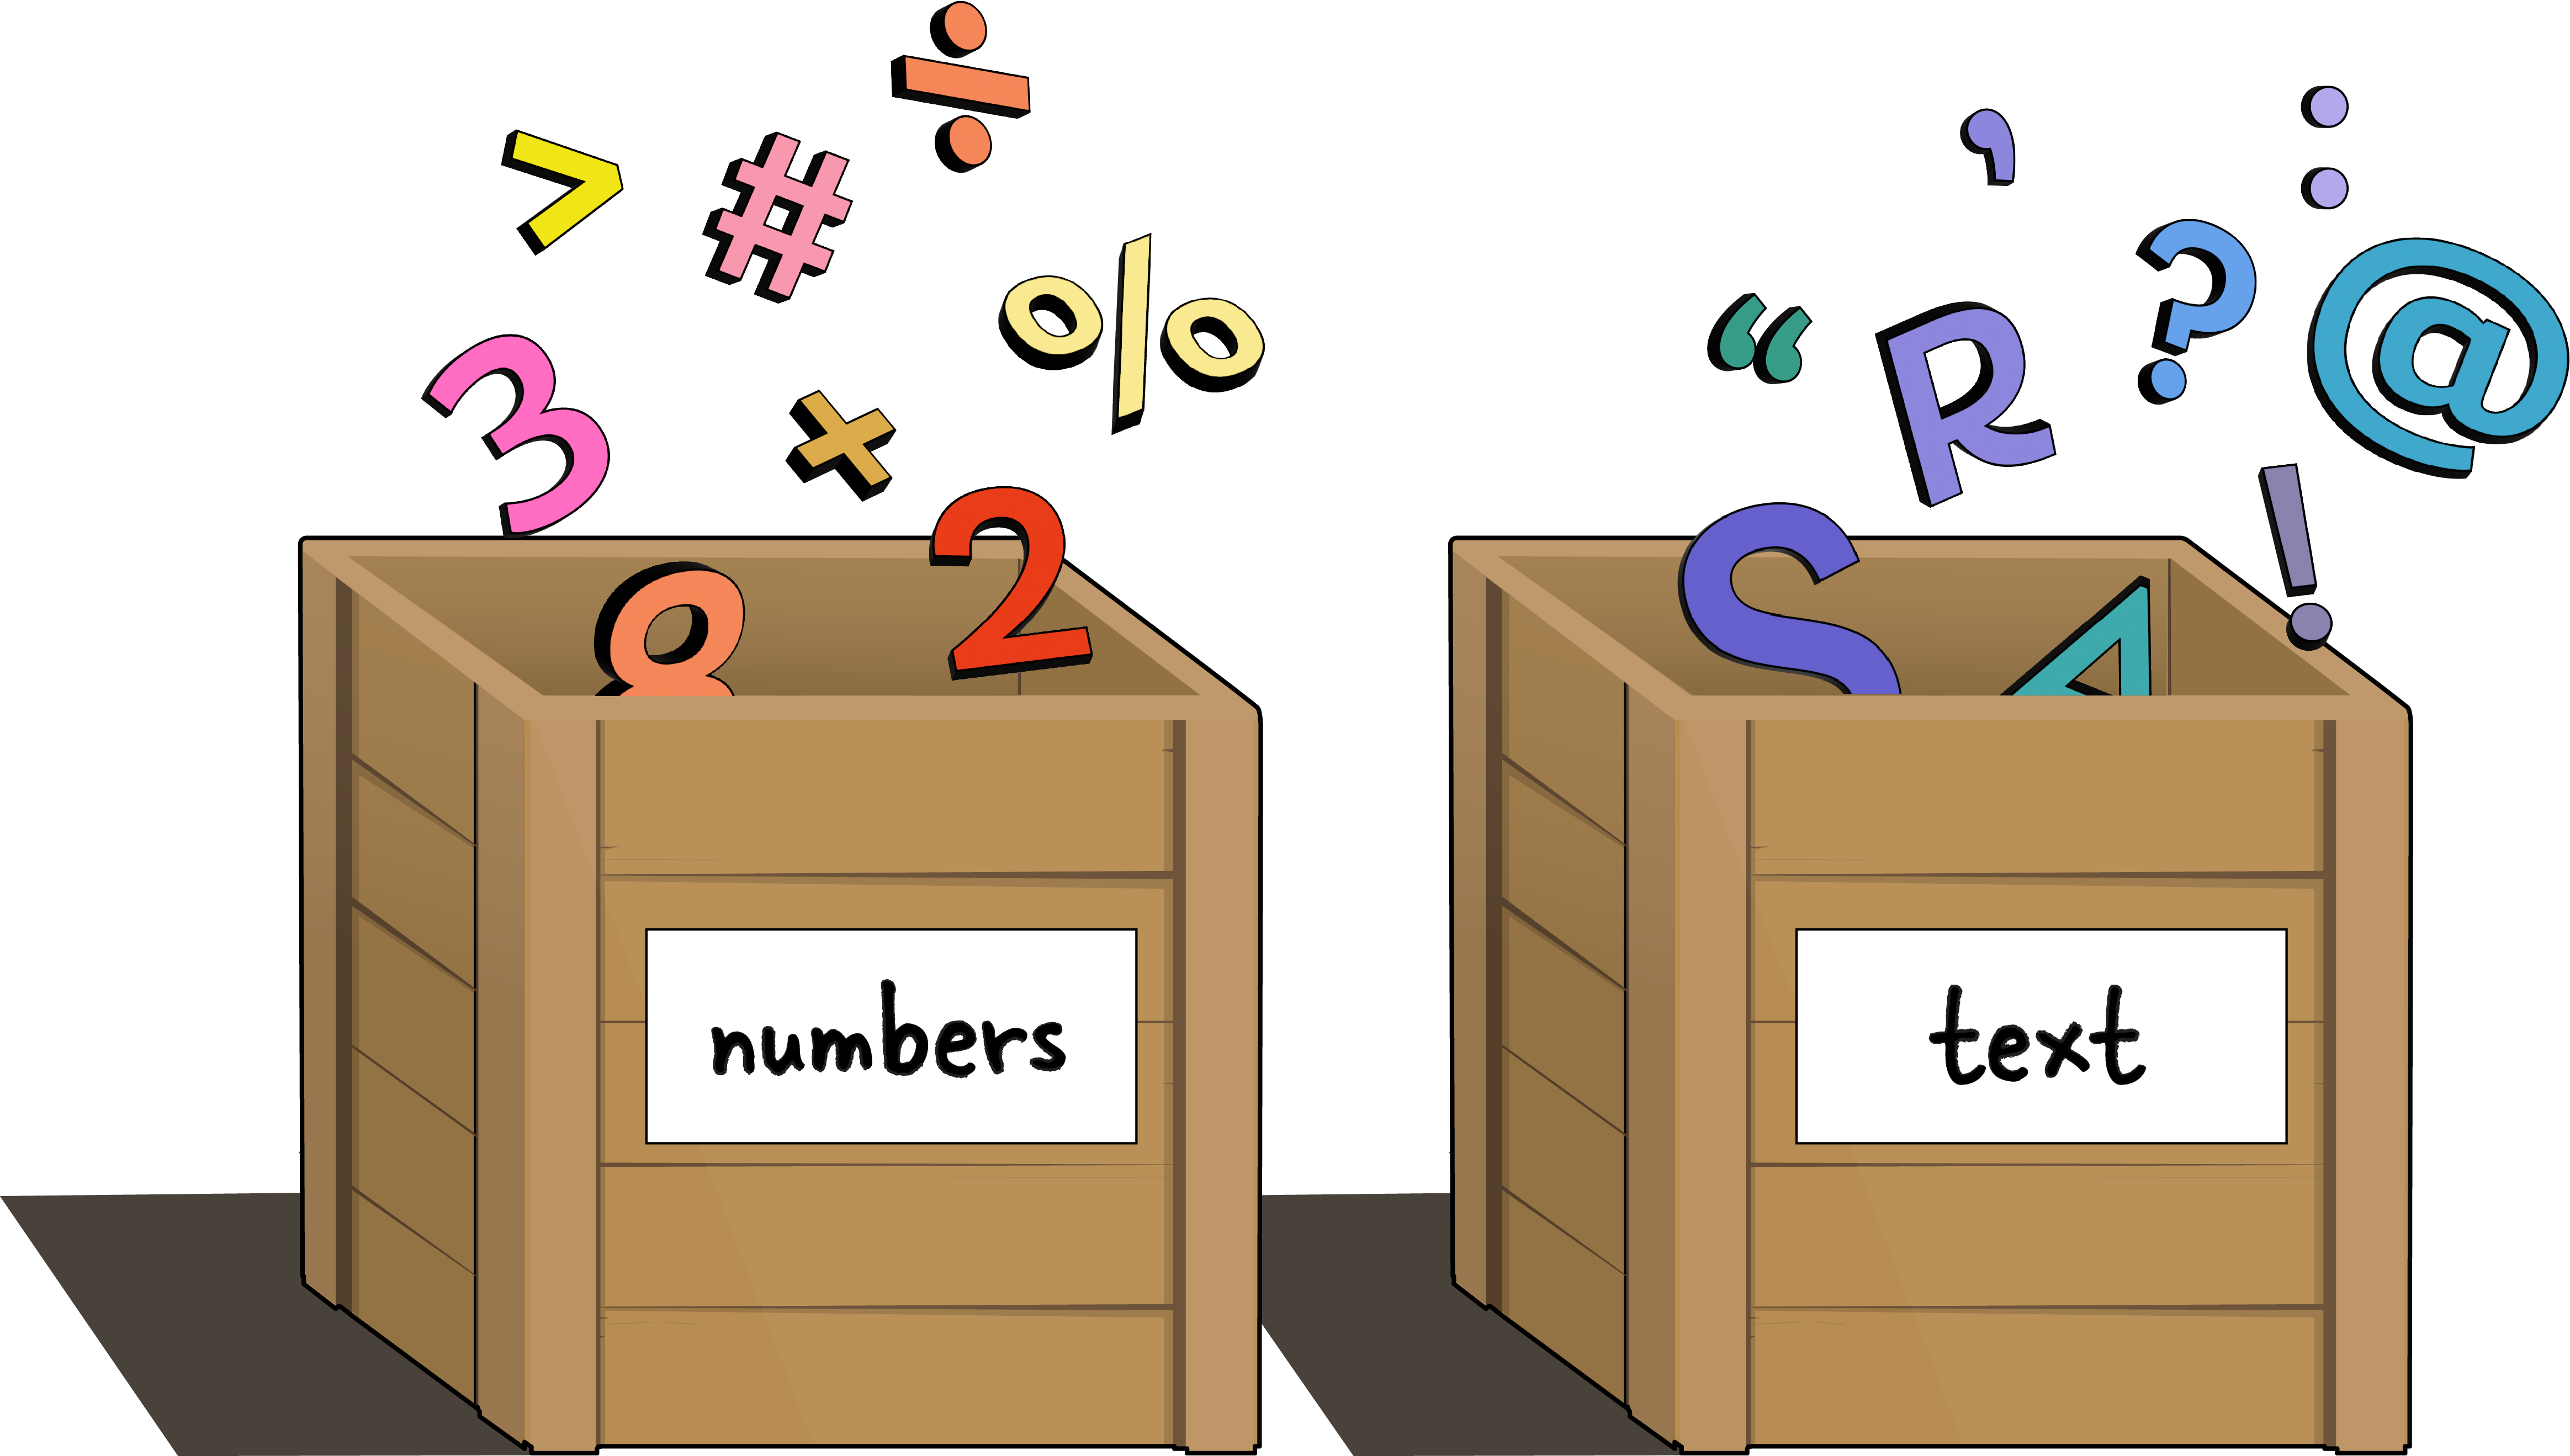 Two boxes, labeled "numbers" and "text". Number type data is being sorted into the "numbers" box, while text data goes into the "text" box.